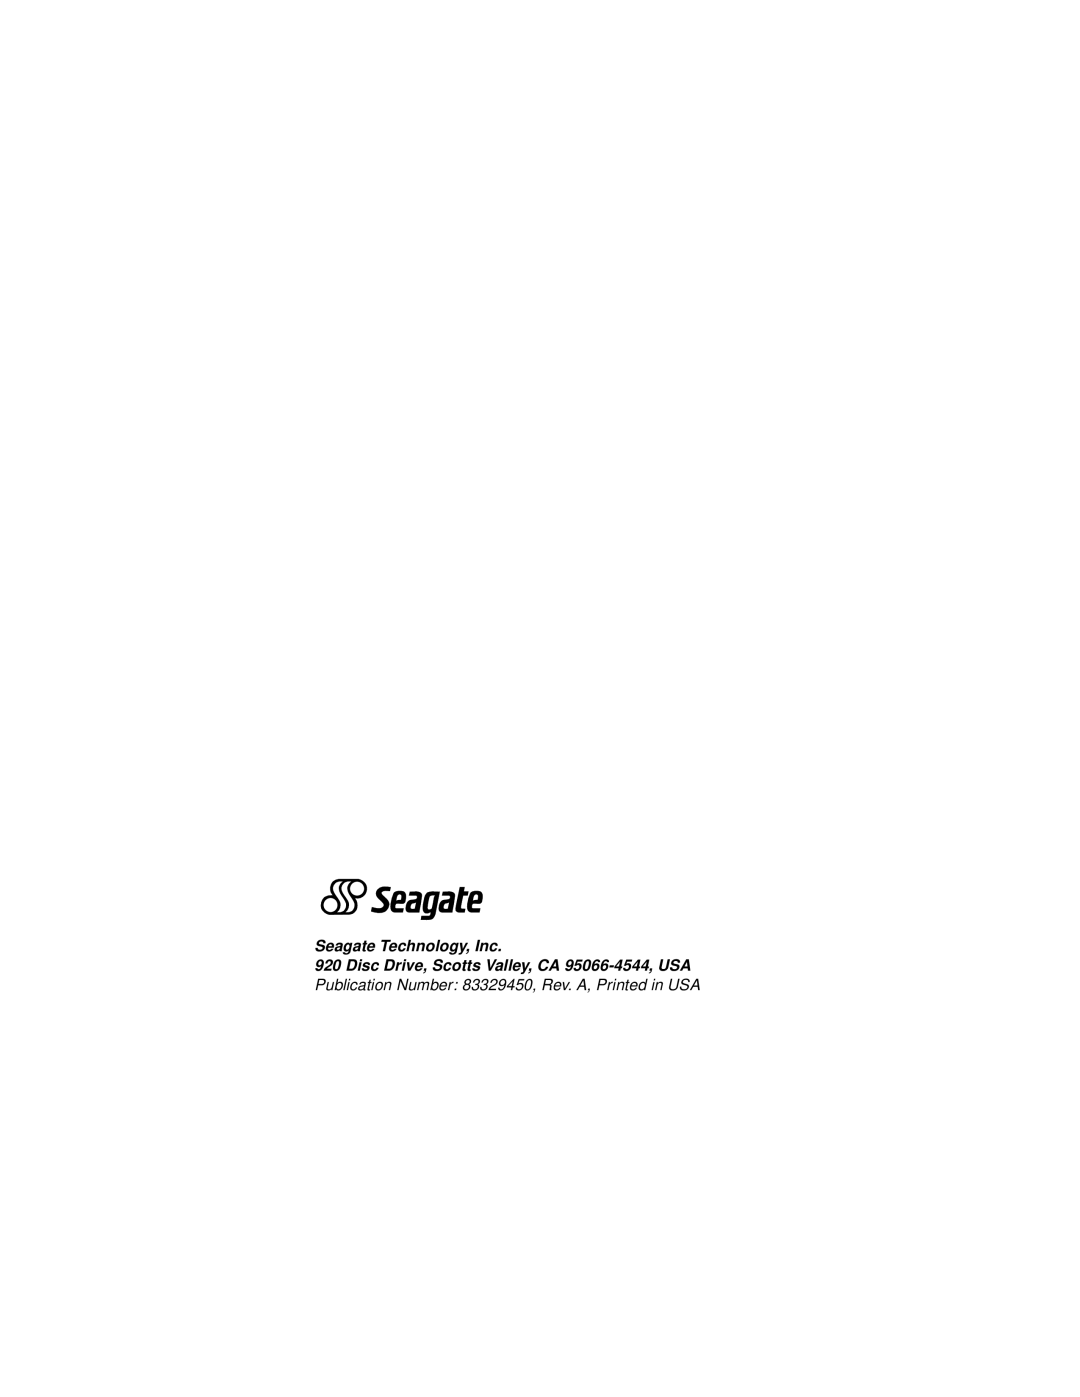 Seagate ST136403LW/LC manual Publication Number 83329450, Rev. A, Printed in USA, Seagate Technology, Inc 